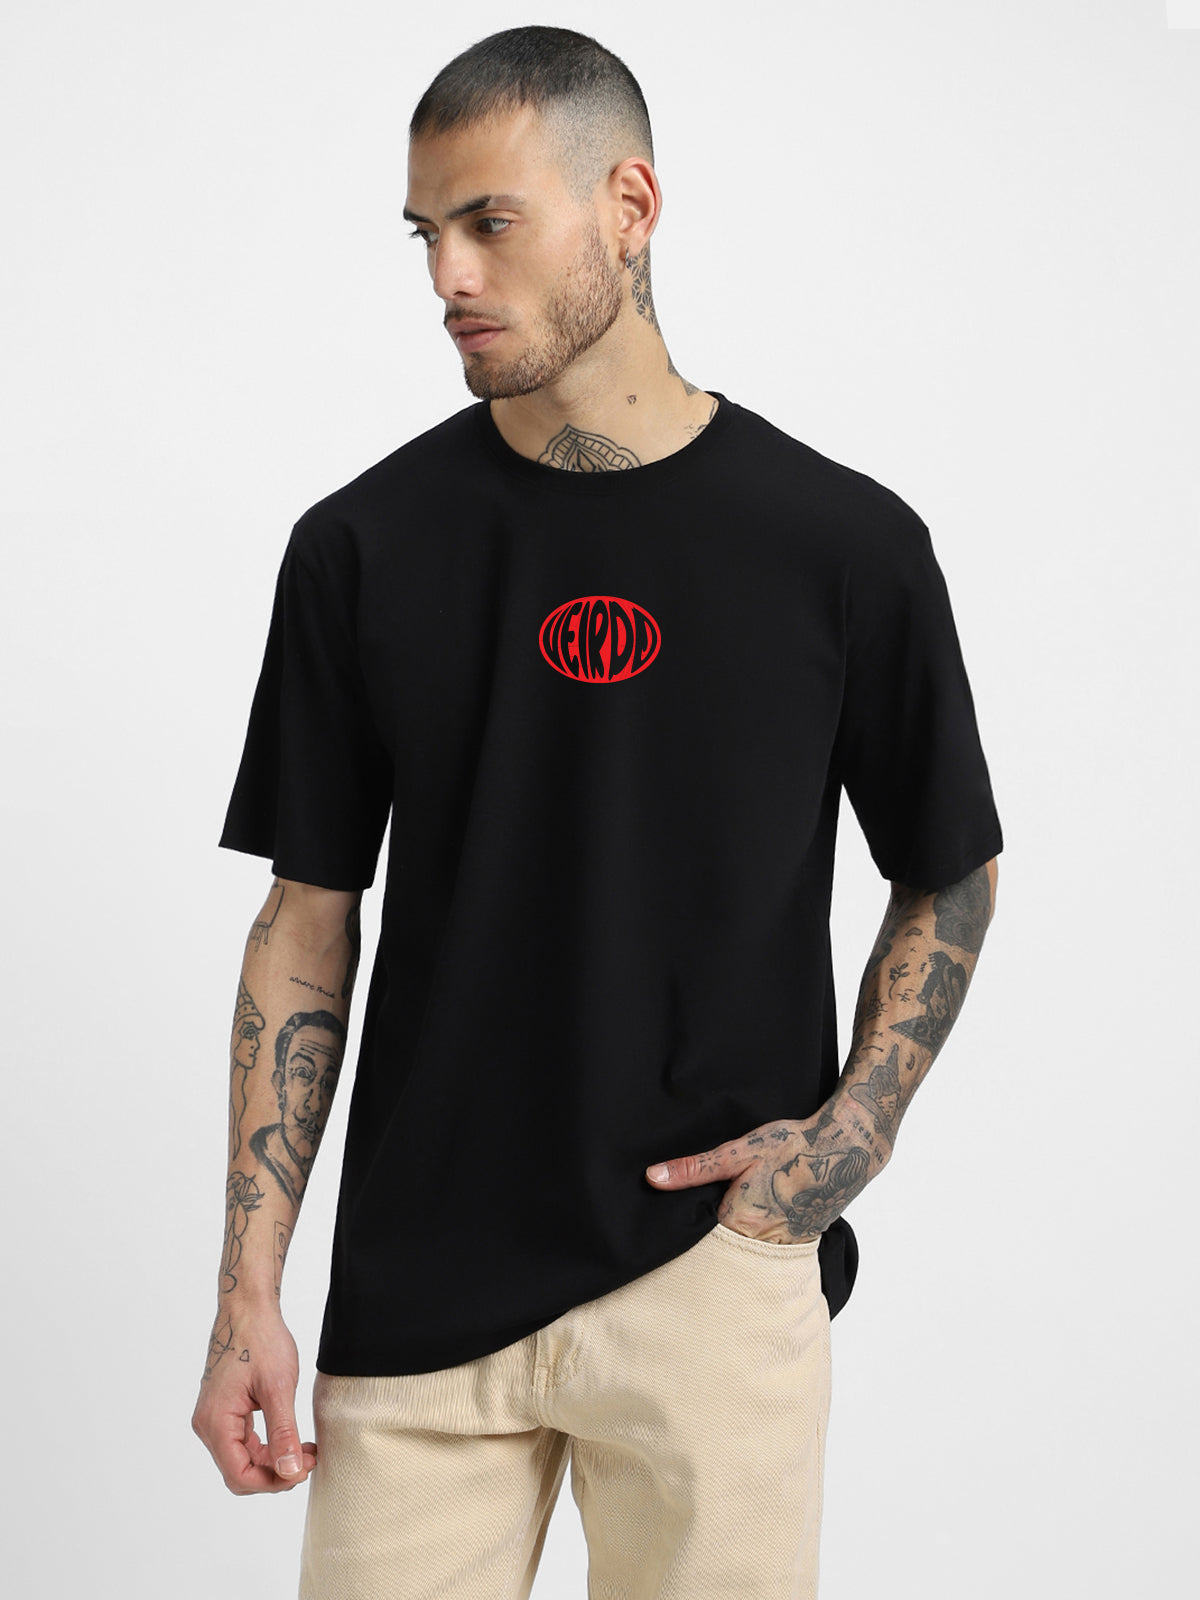 ALWAYS LONELY AT THE TOP Black Oversized Back Graphic Printed Tshirt